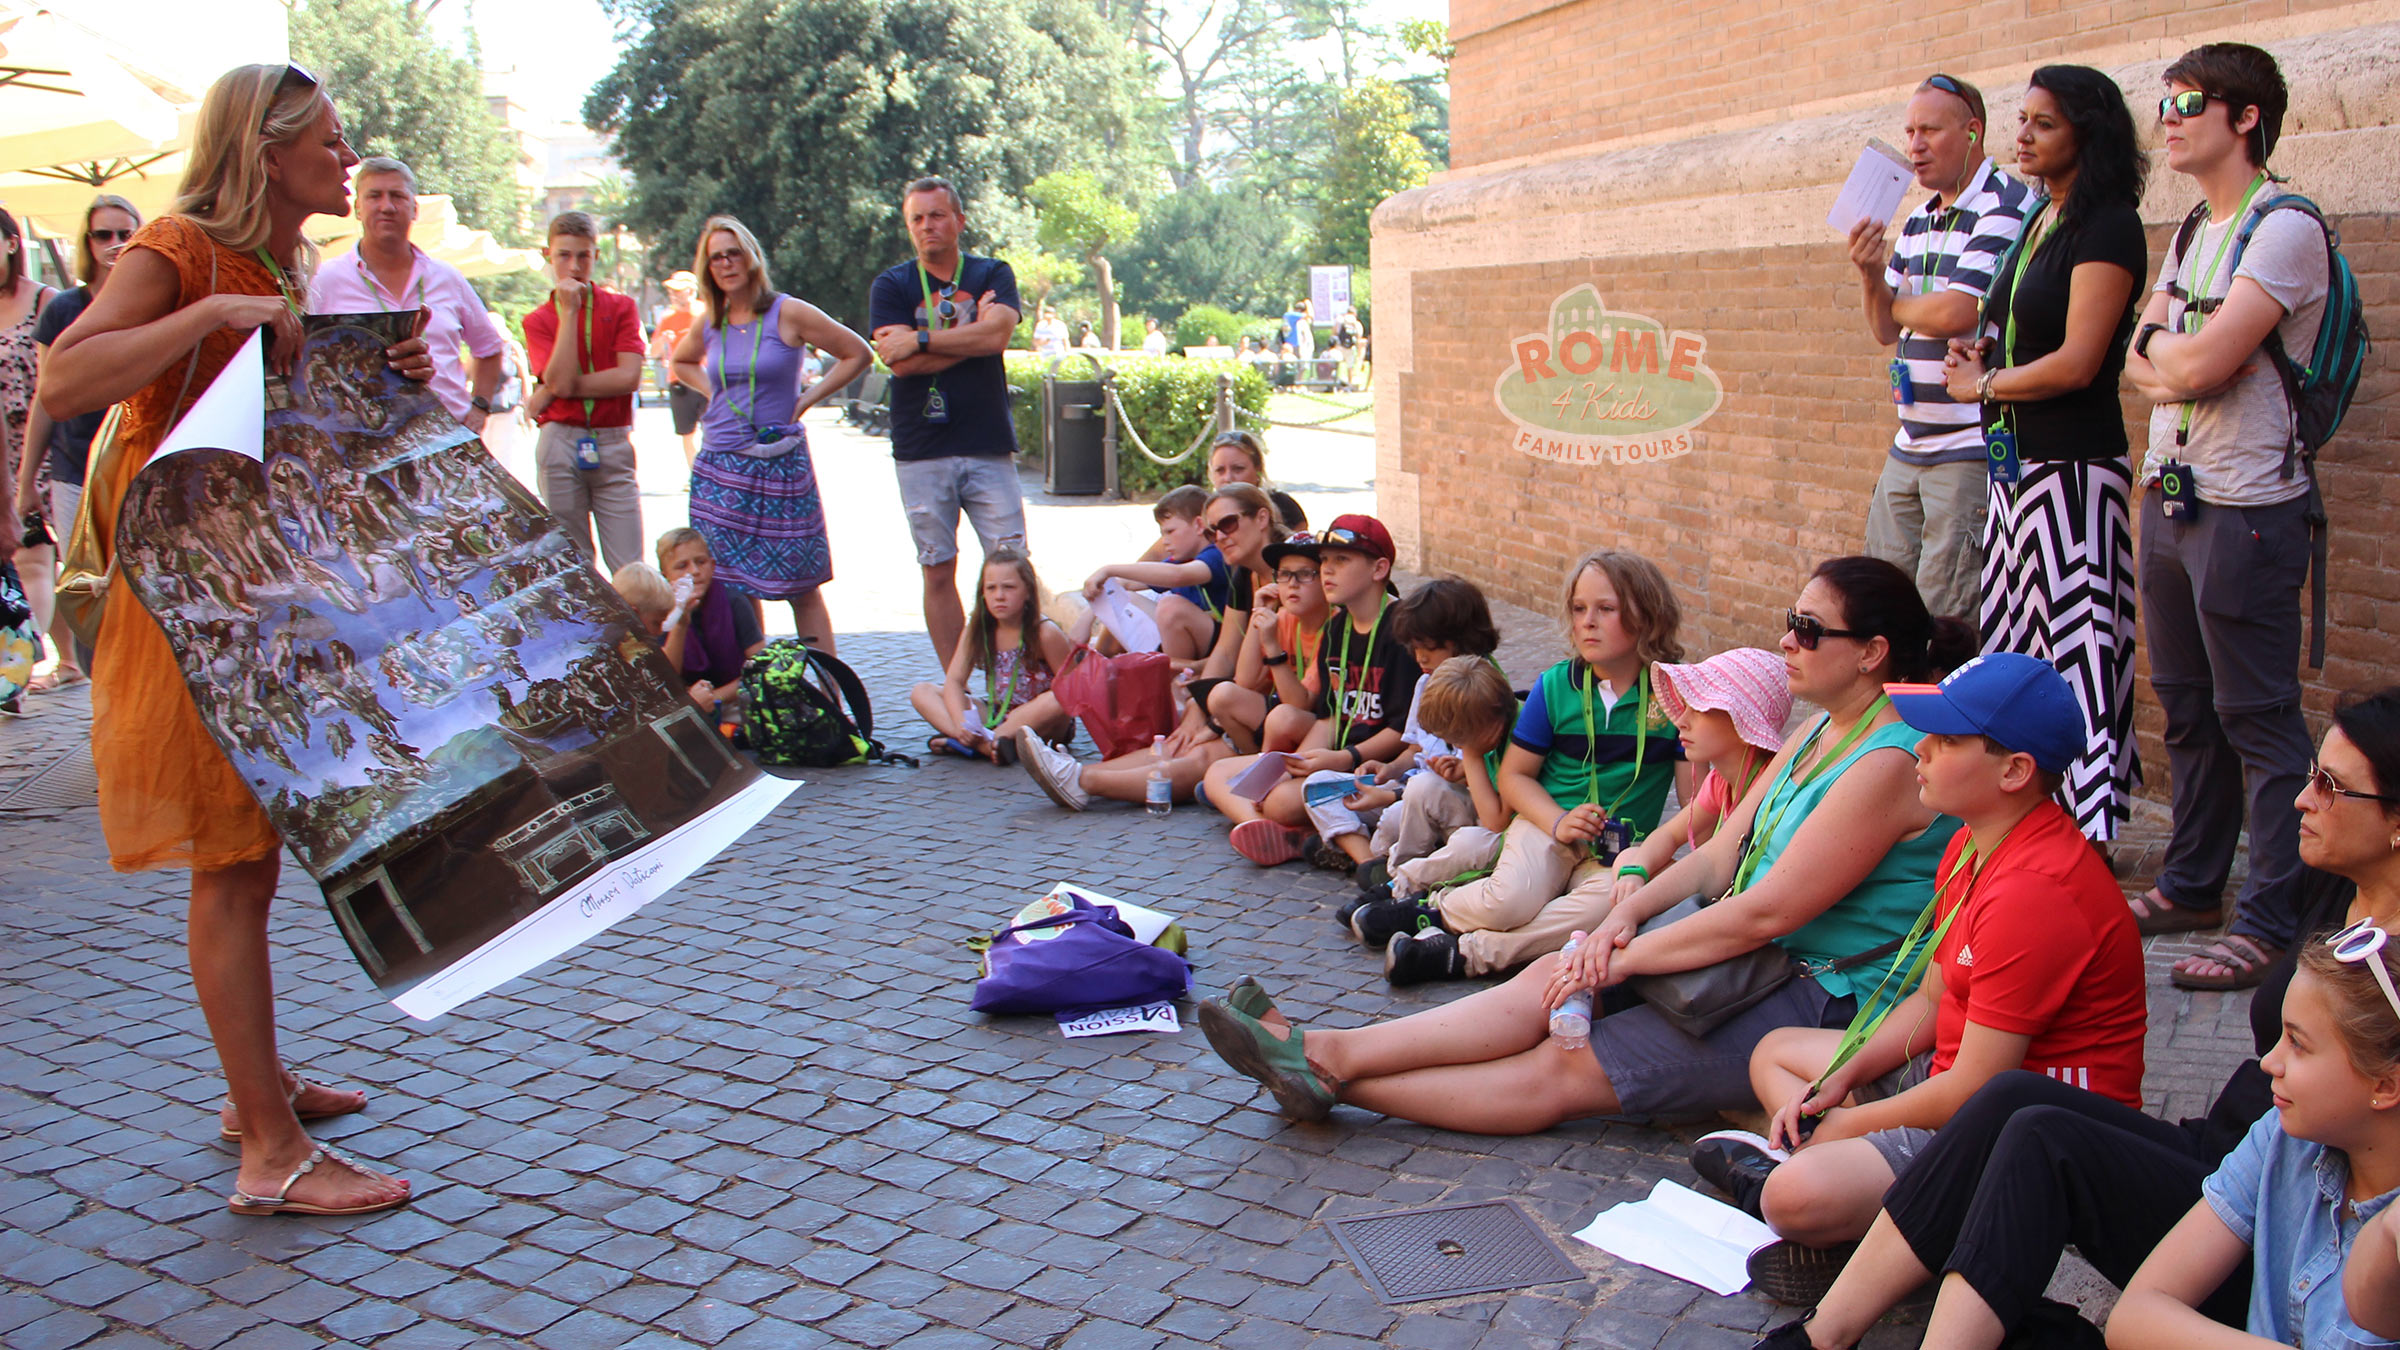 Rome 4 Kids Tours, Tuesday, February 18, 2020, Press release picture